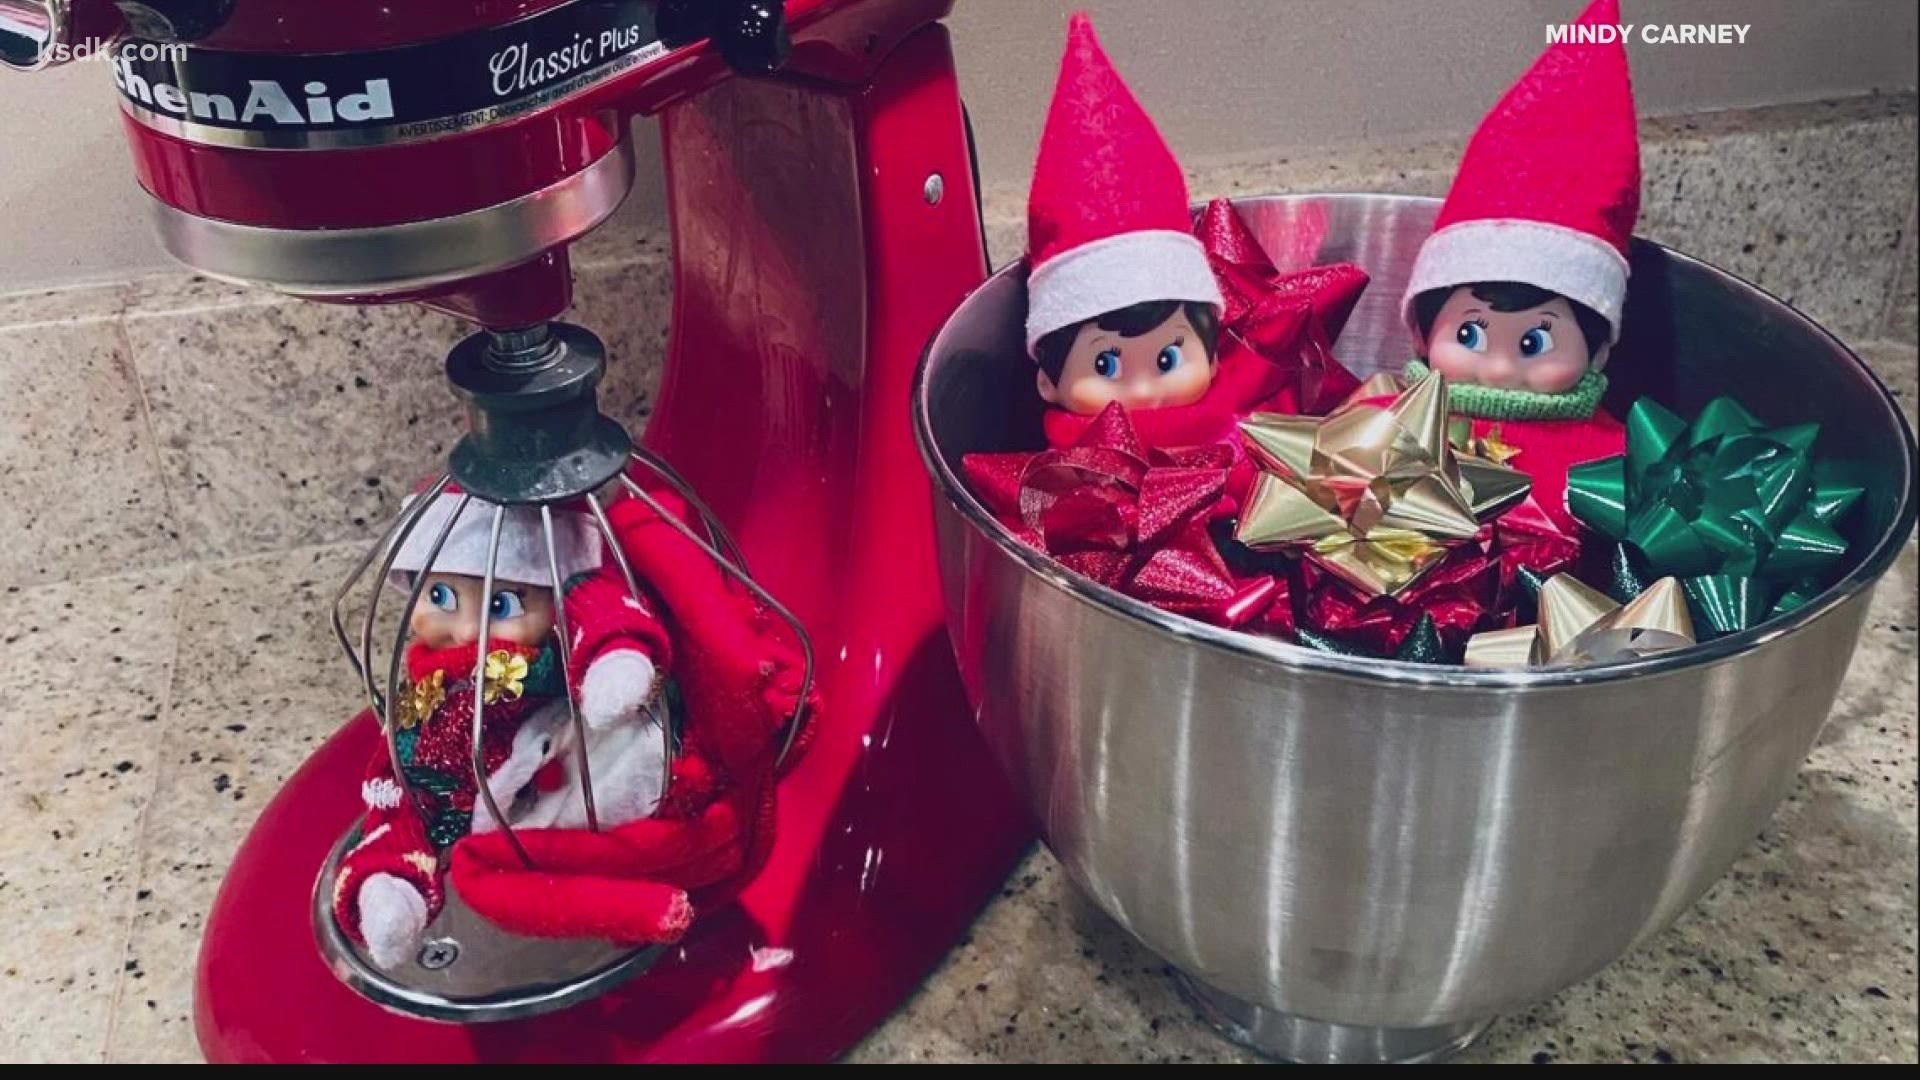 Three little elves have been very busy at one St. Louis area home.